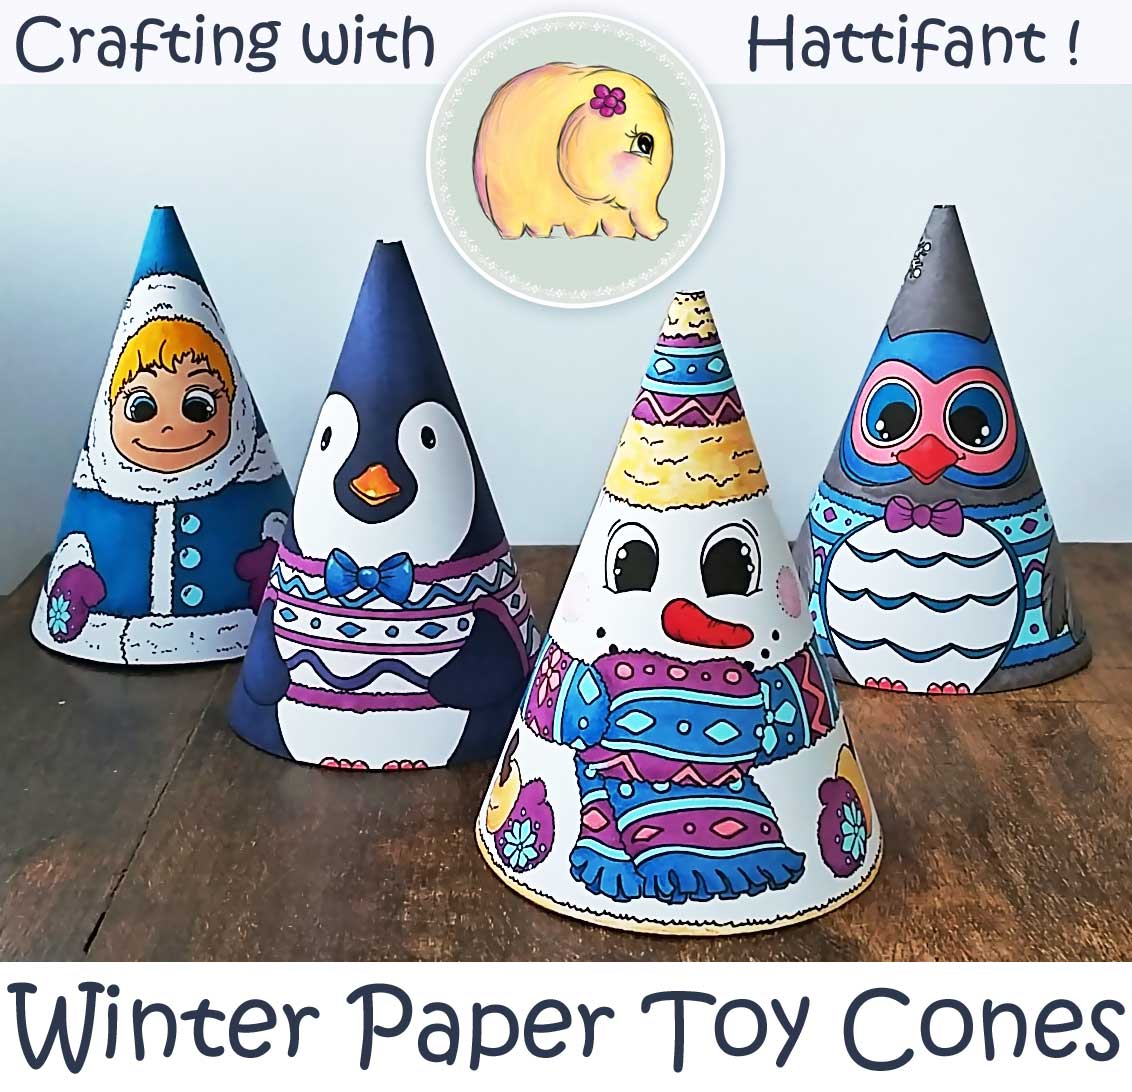 Hattifant's Winter Paper Toy Cones to Color and Craft